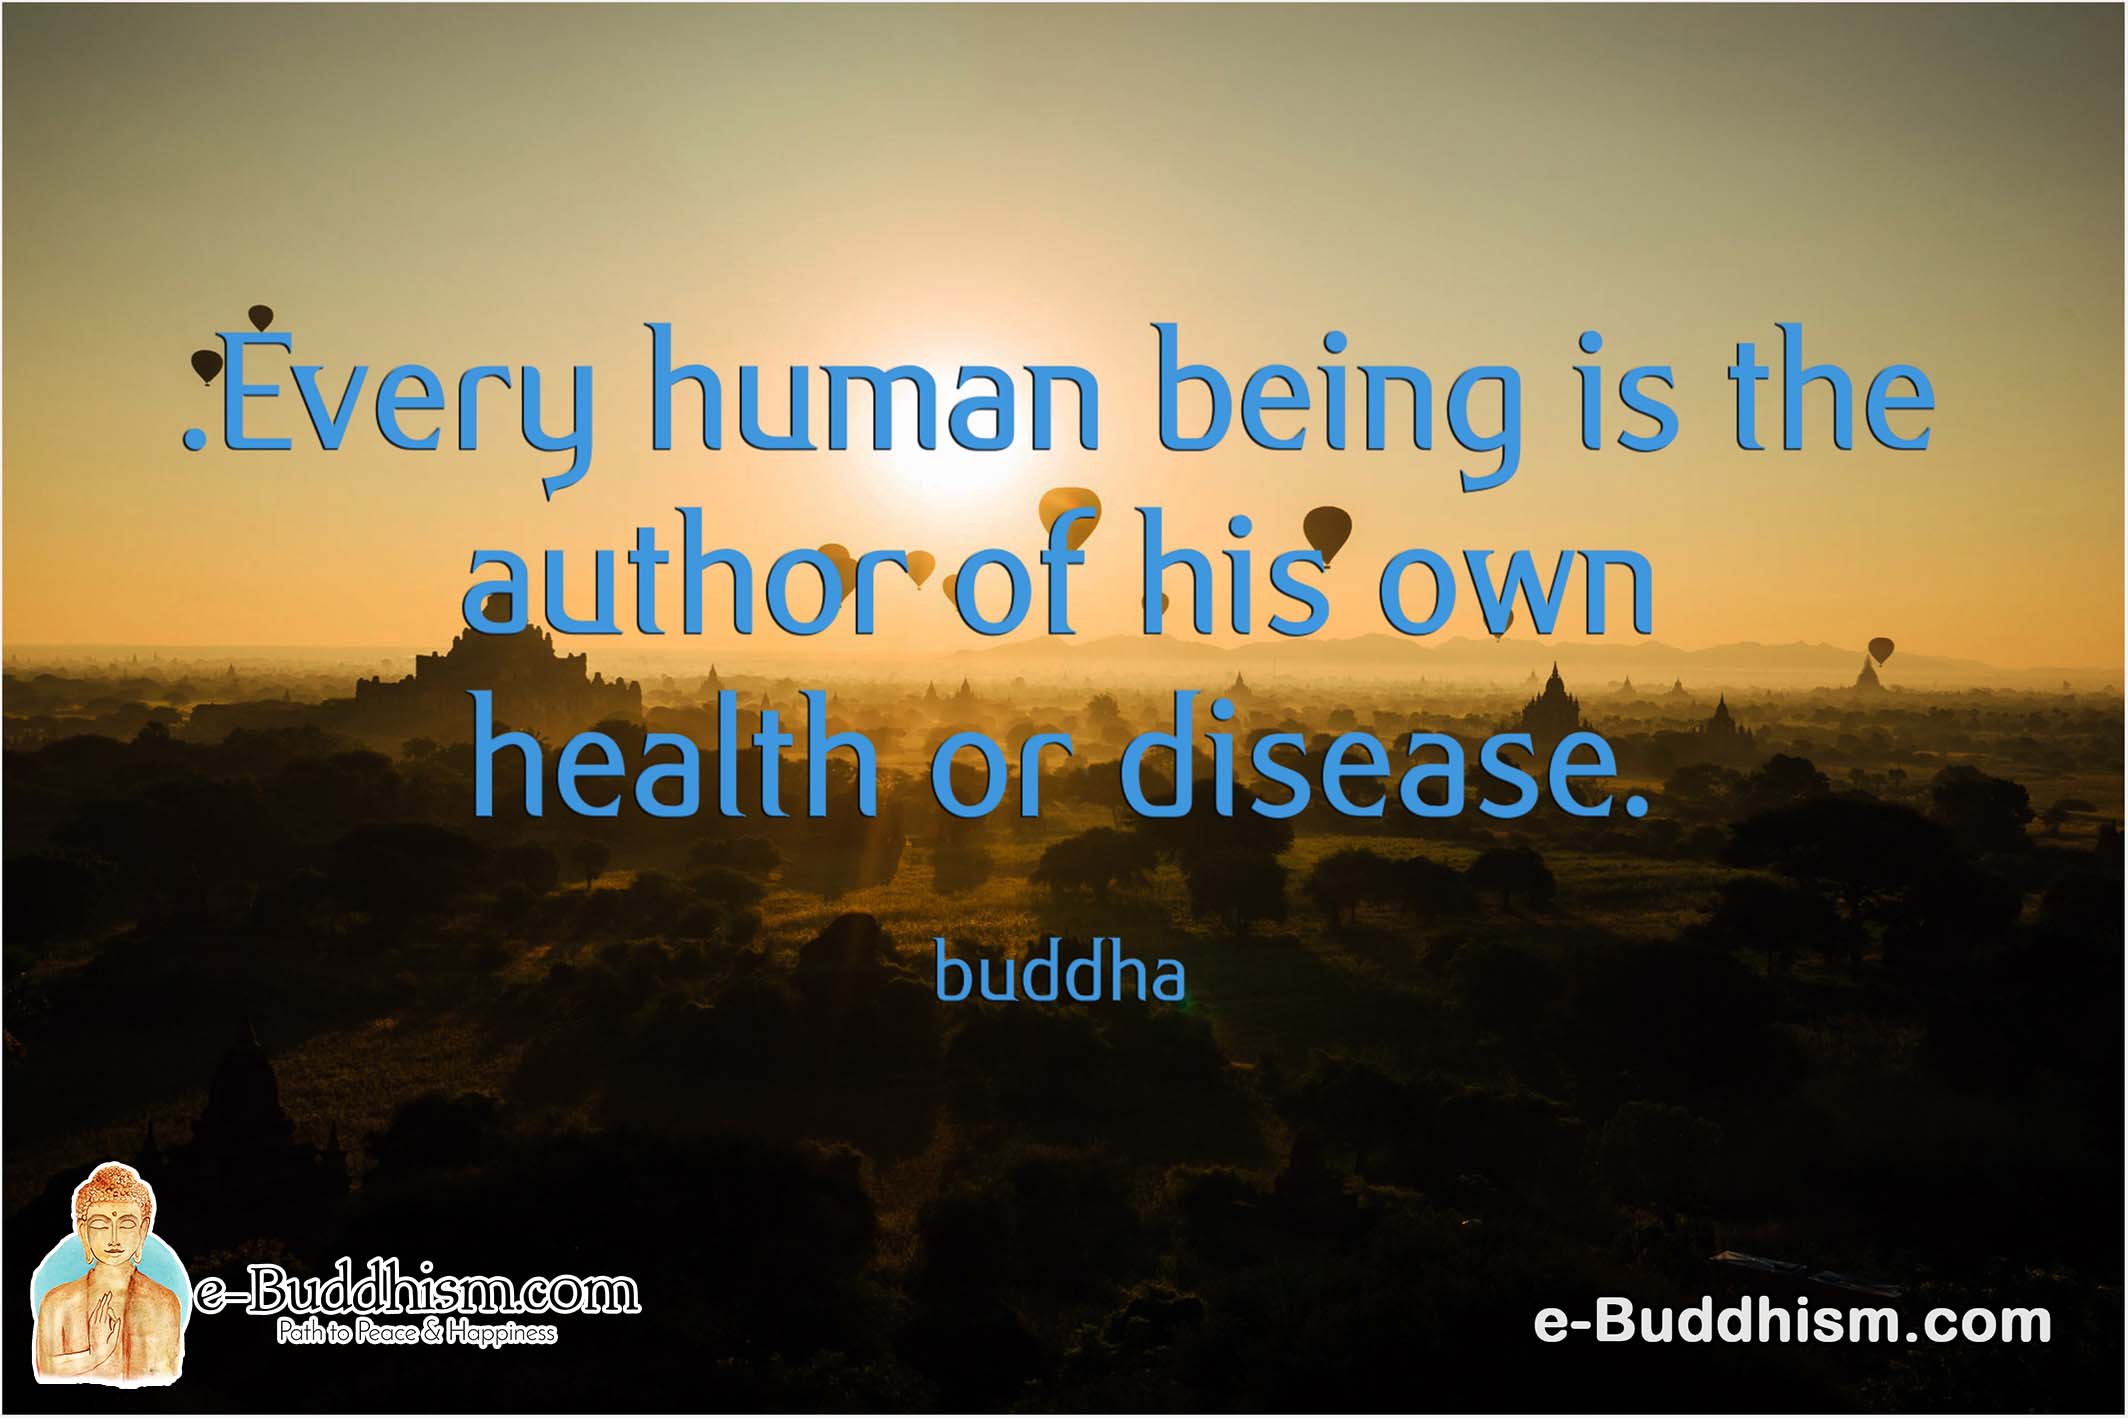 Every human being is the author of his own health or disease. -Buddha